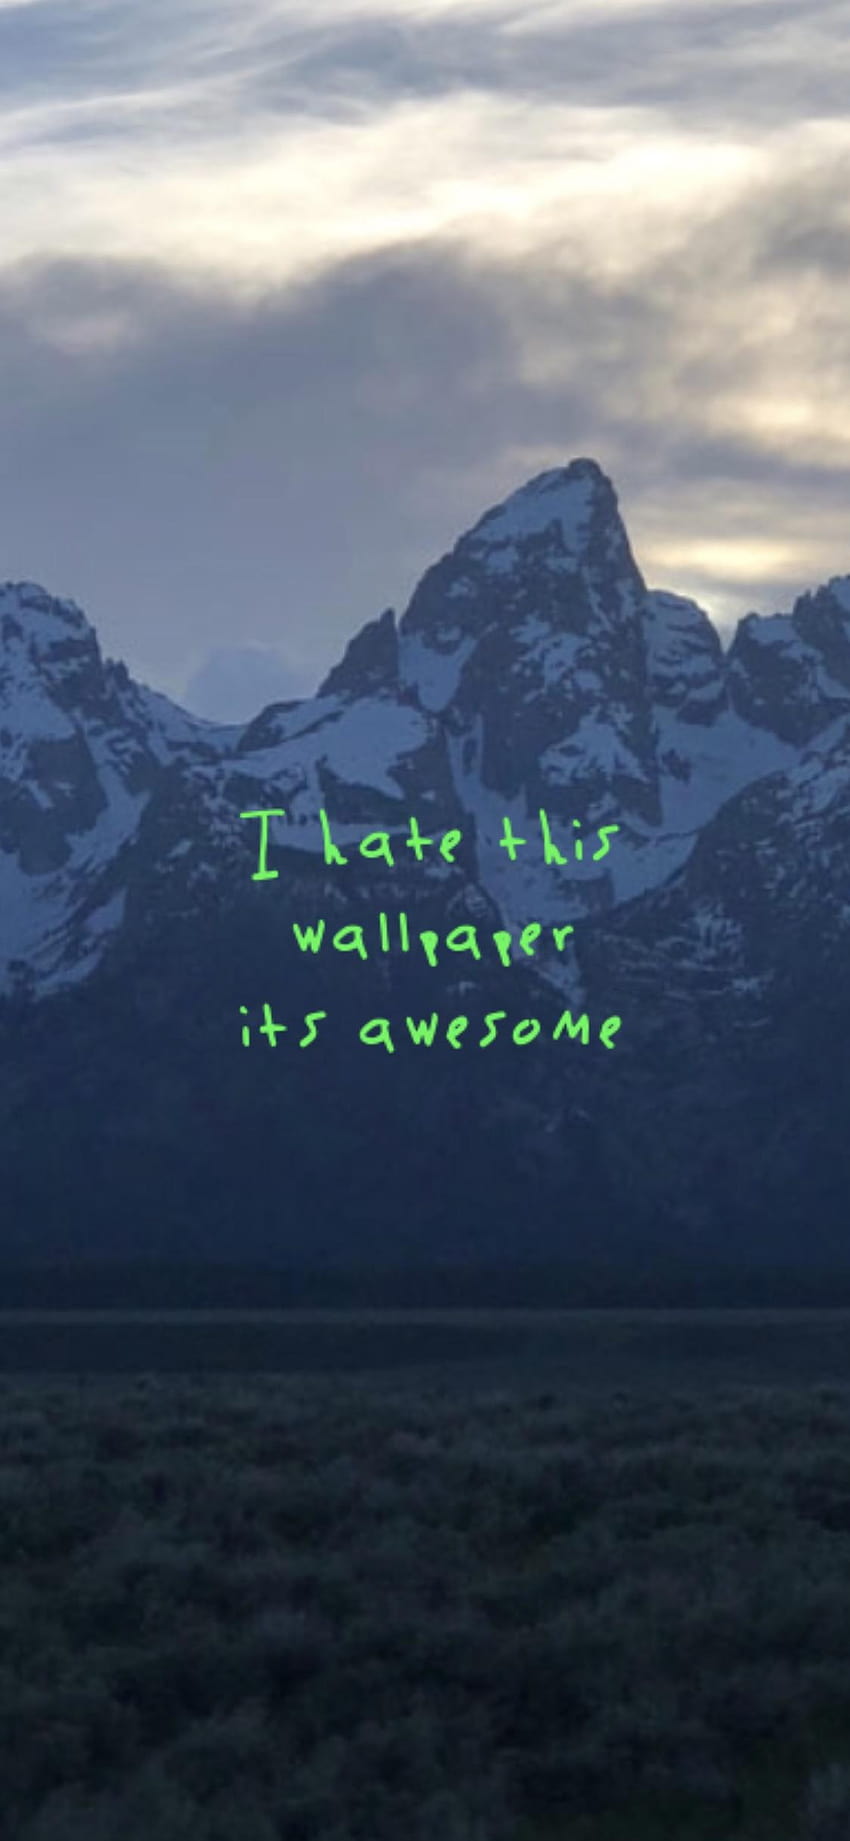 Kanye Wests album cover is being turned into memes thanks to new website   Independentie